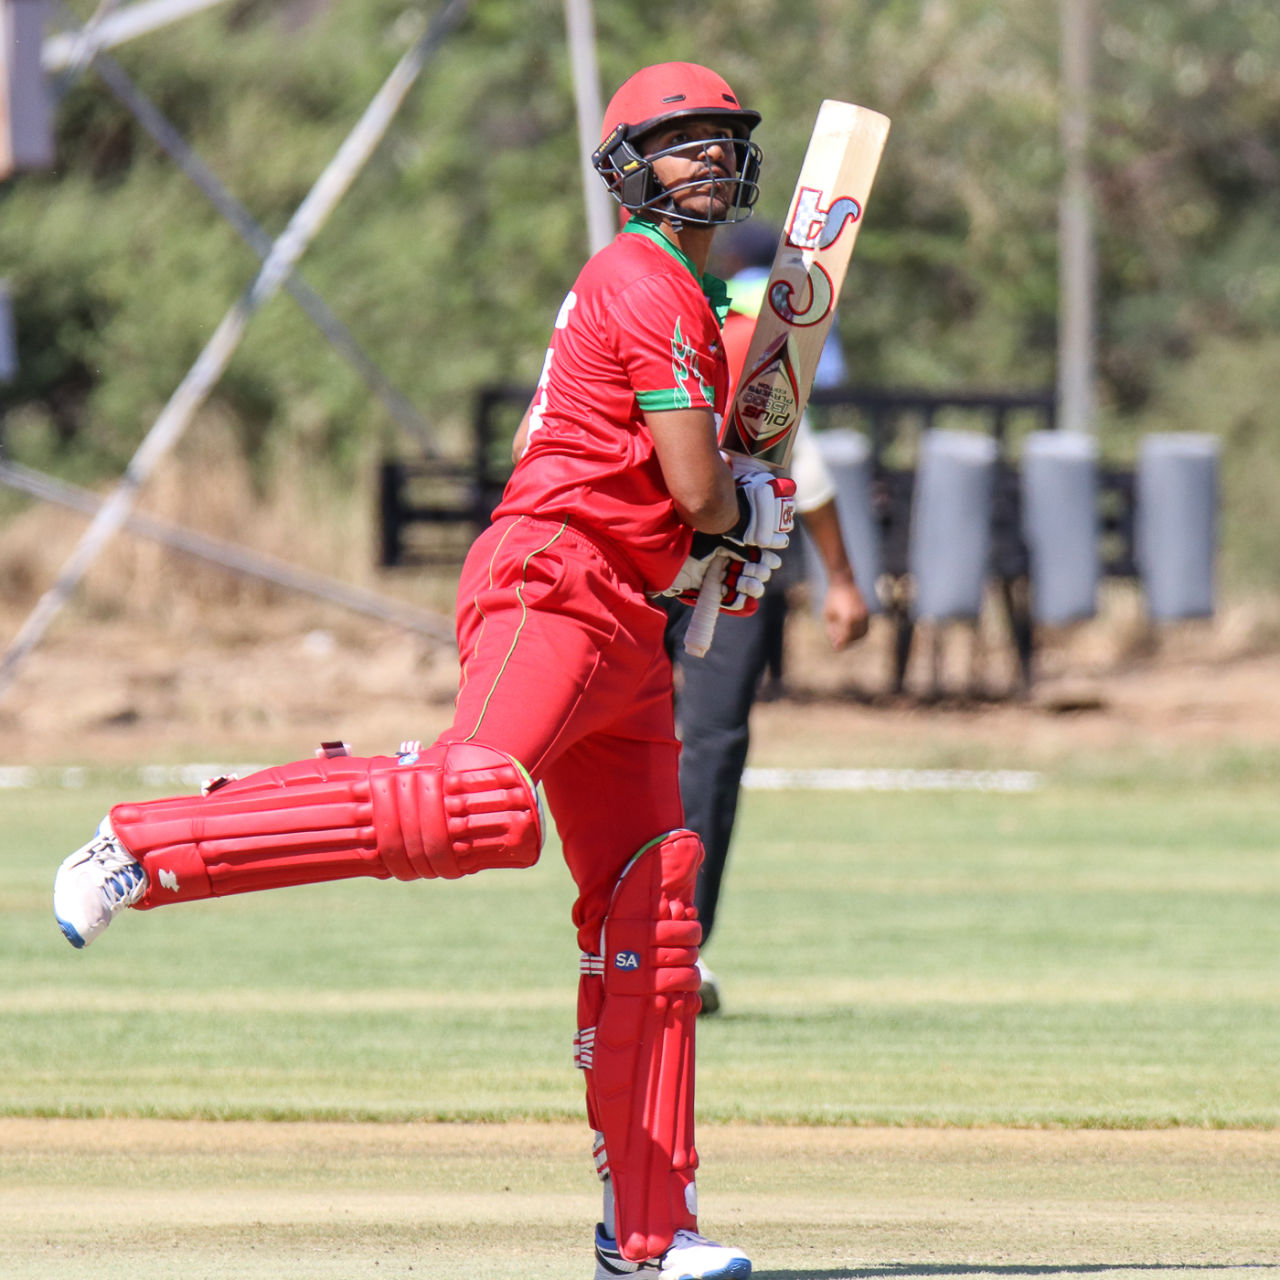 Aqib Ilyas completes a pirouette after hooking for six, Canada v Oman, ICC World Cricket League Division Two, Windhoek, February 8, 2018